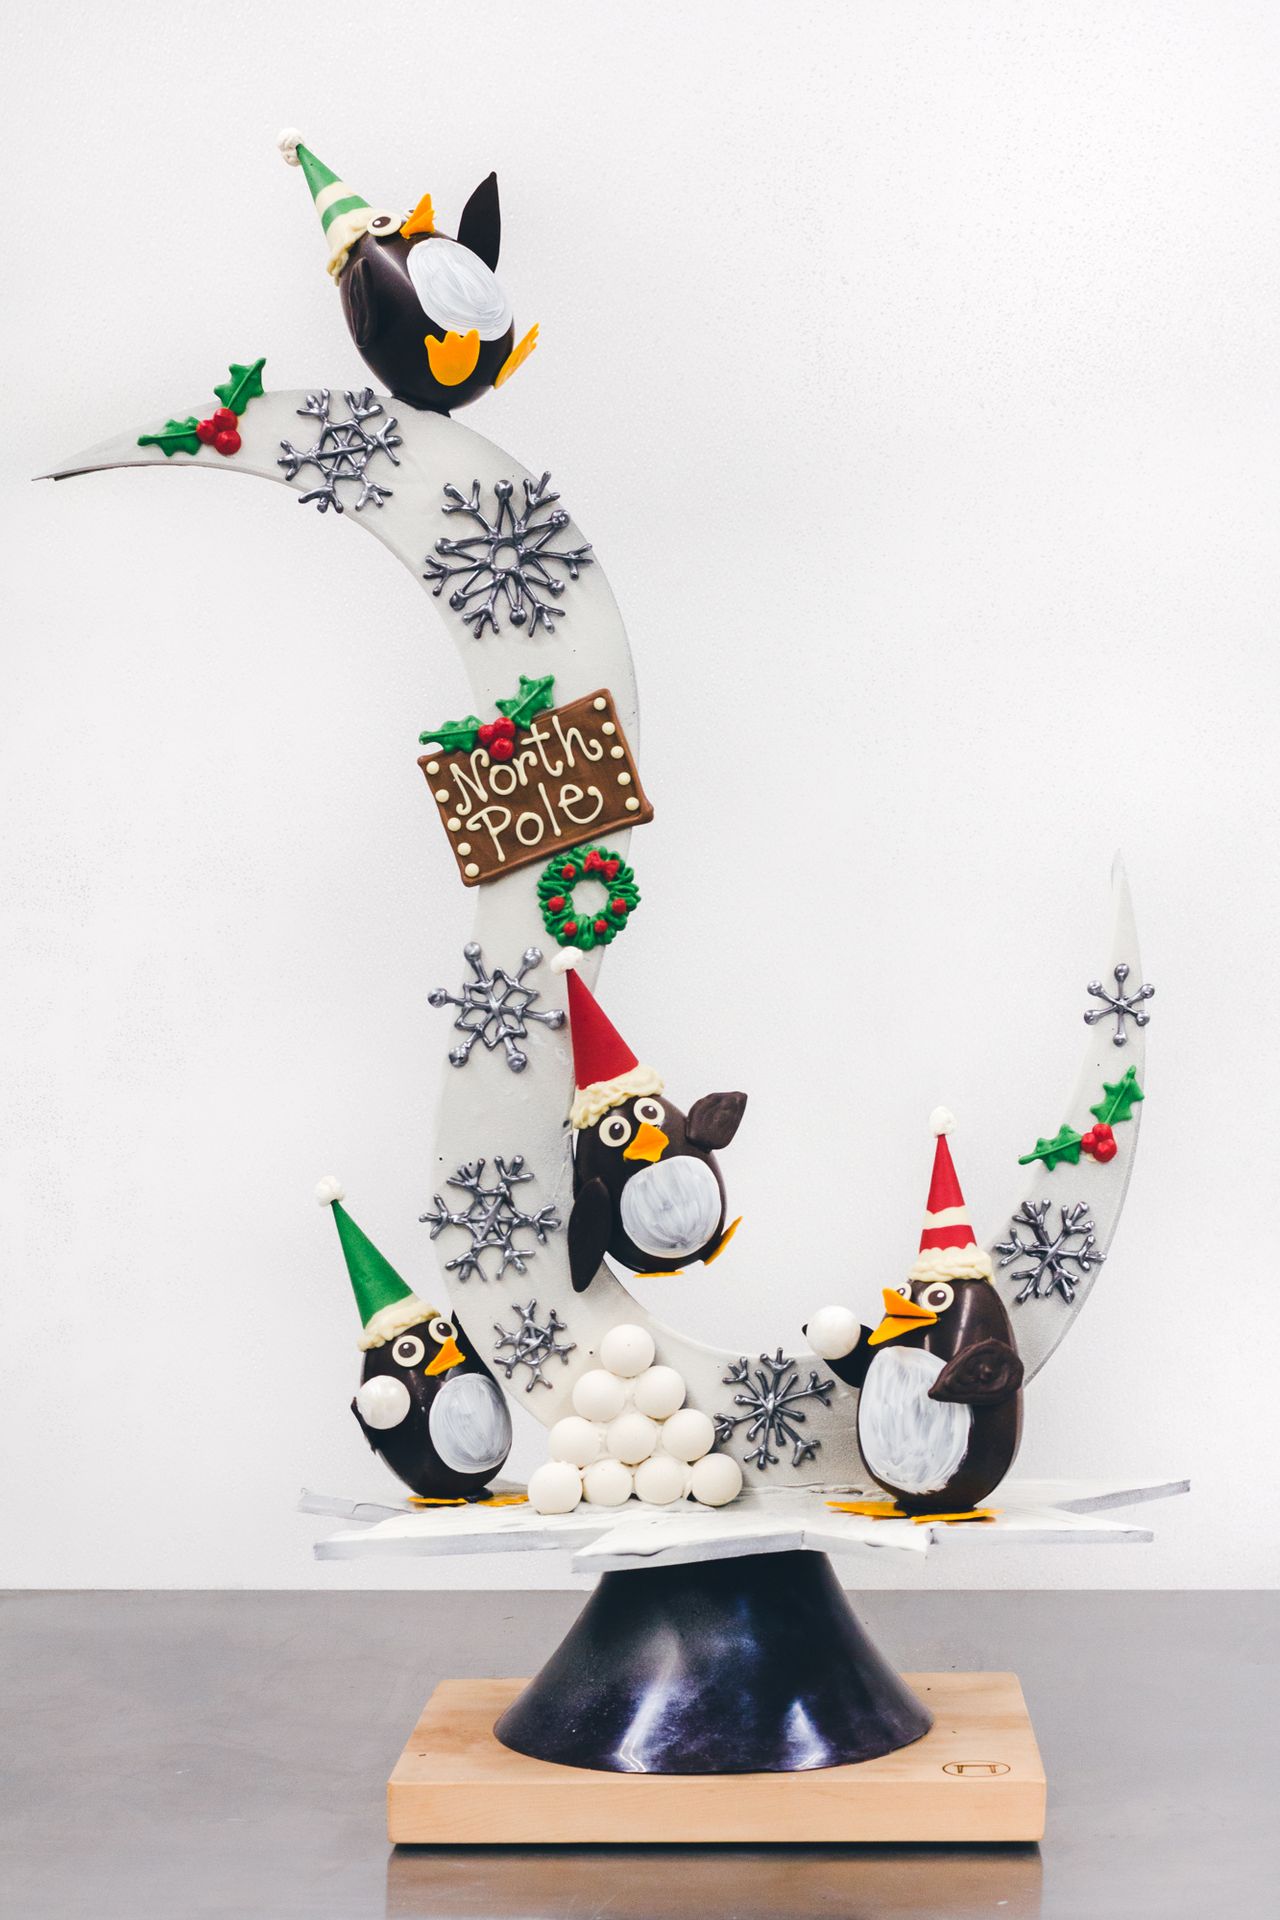 A large chocolate Christmas sculpture with cute penguins wearing elves hats having a snowball fight.